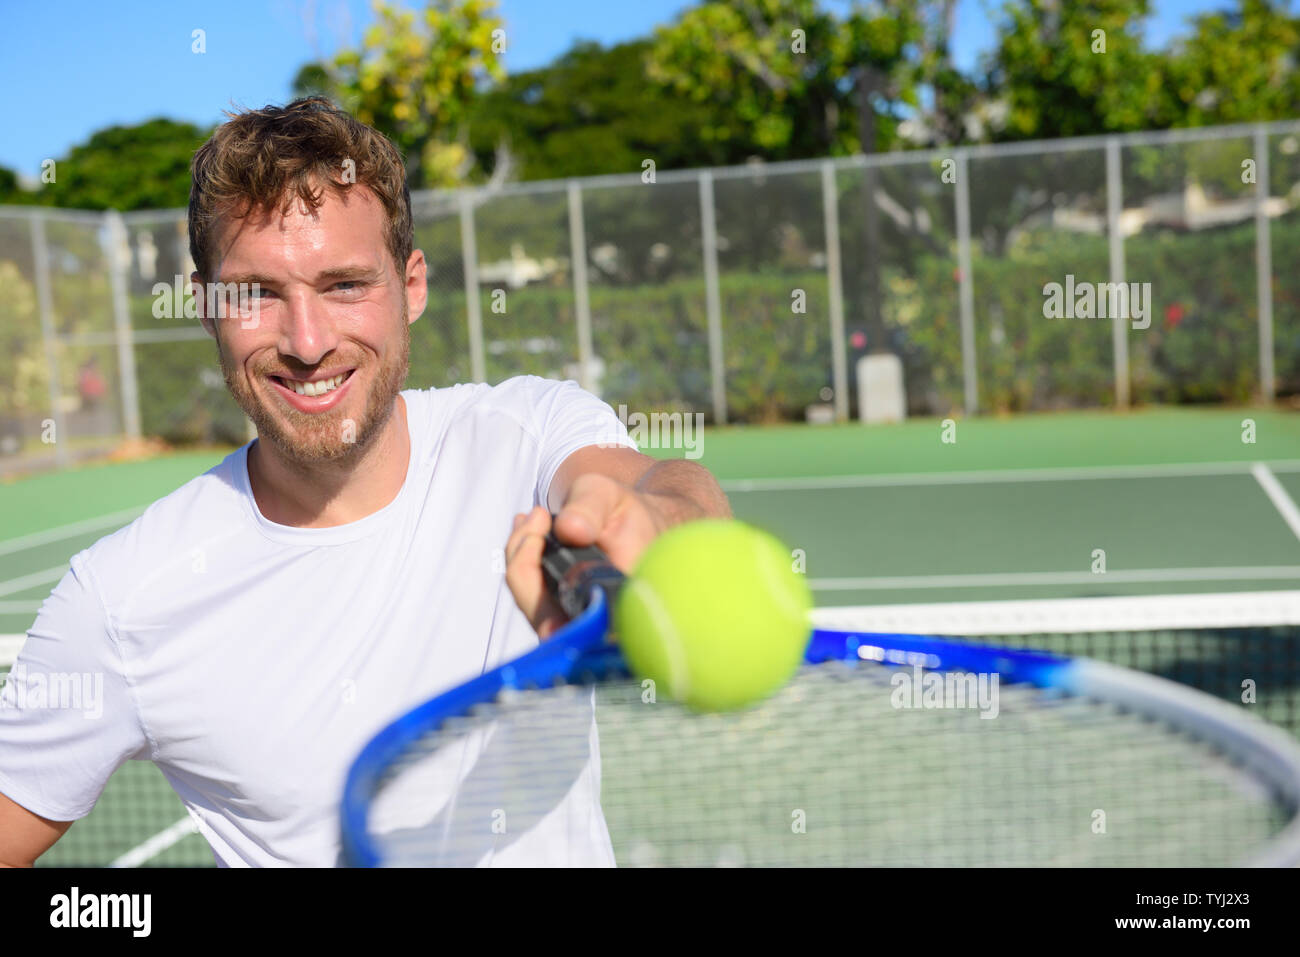 Tennis player portrait man showing ball and racket. Smiling happy male athlete inviting you to play tennis. Healthy active sport and fitness lifestyle concept. Stock Photo